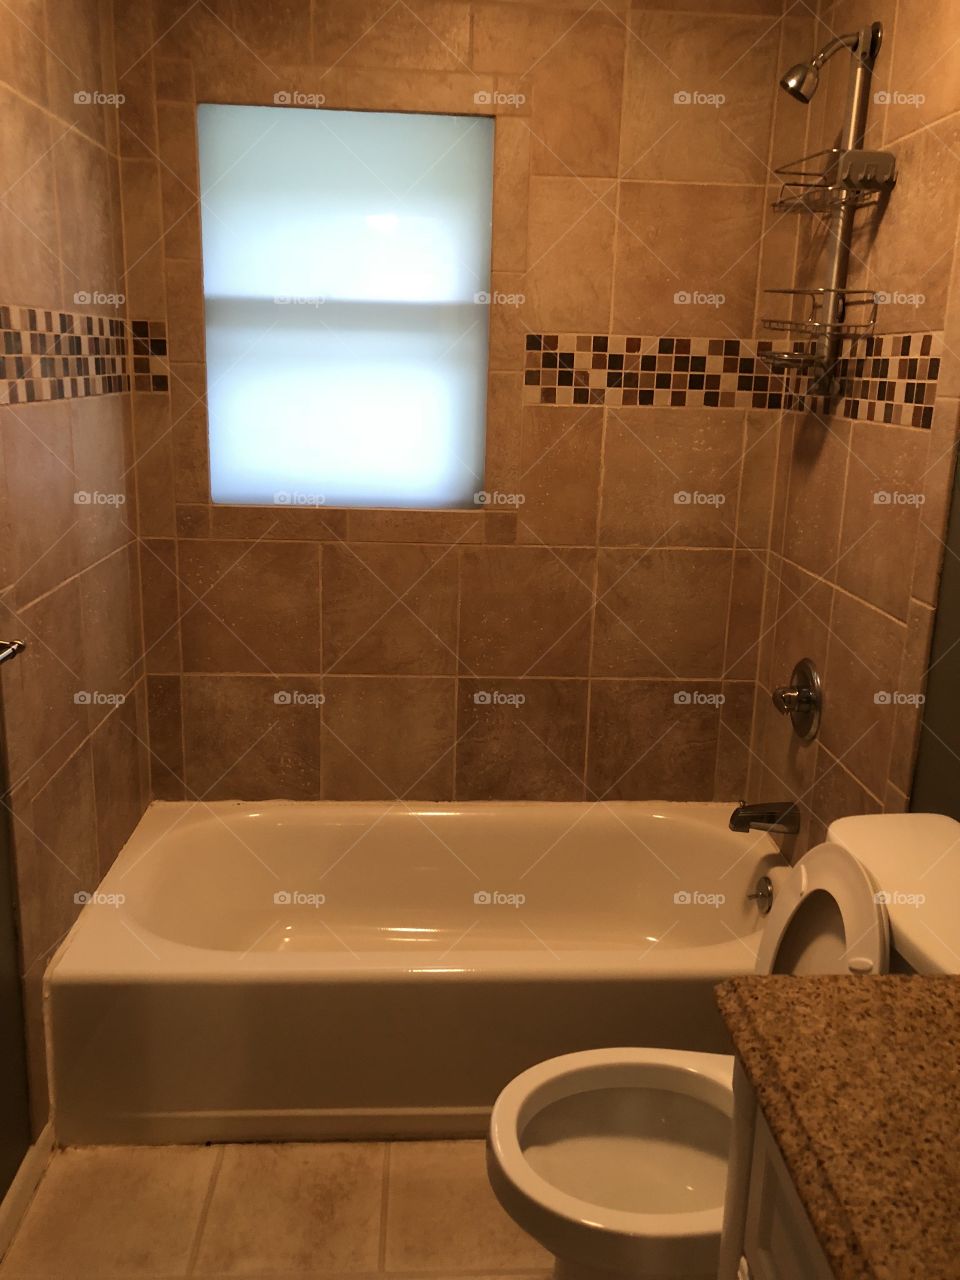 Beautiful bathroom with a fogged window. New home excitement! 